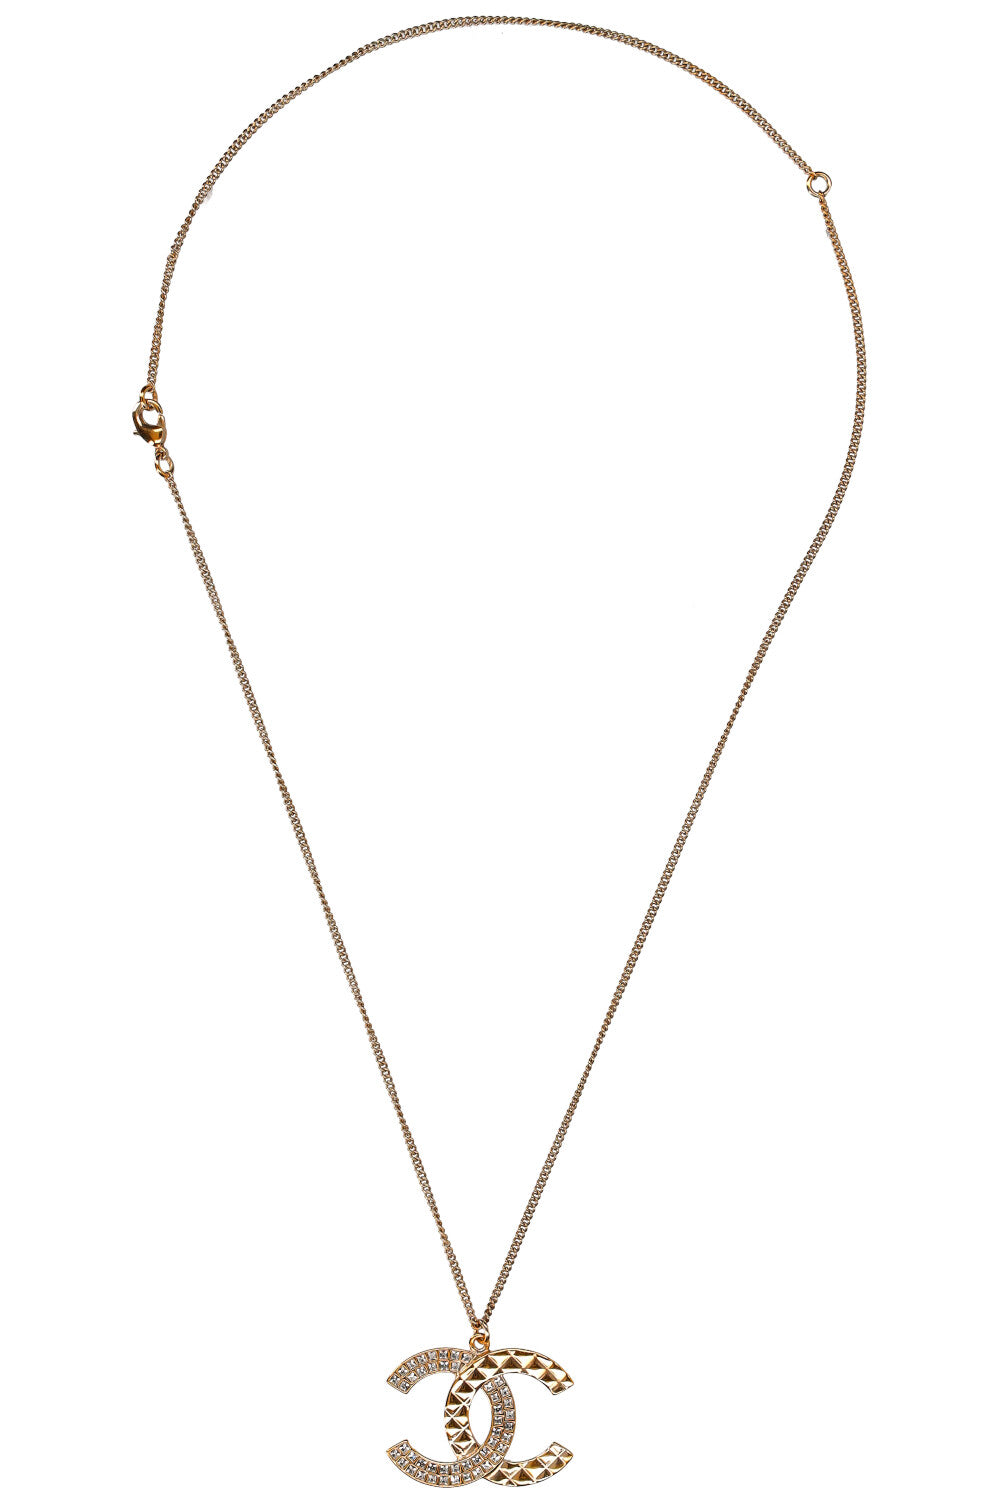 CHANEL Baguette Christal CC Necklace Quilted Gold